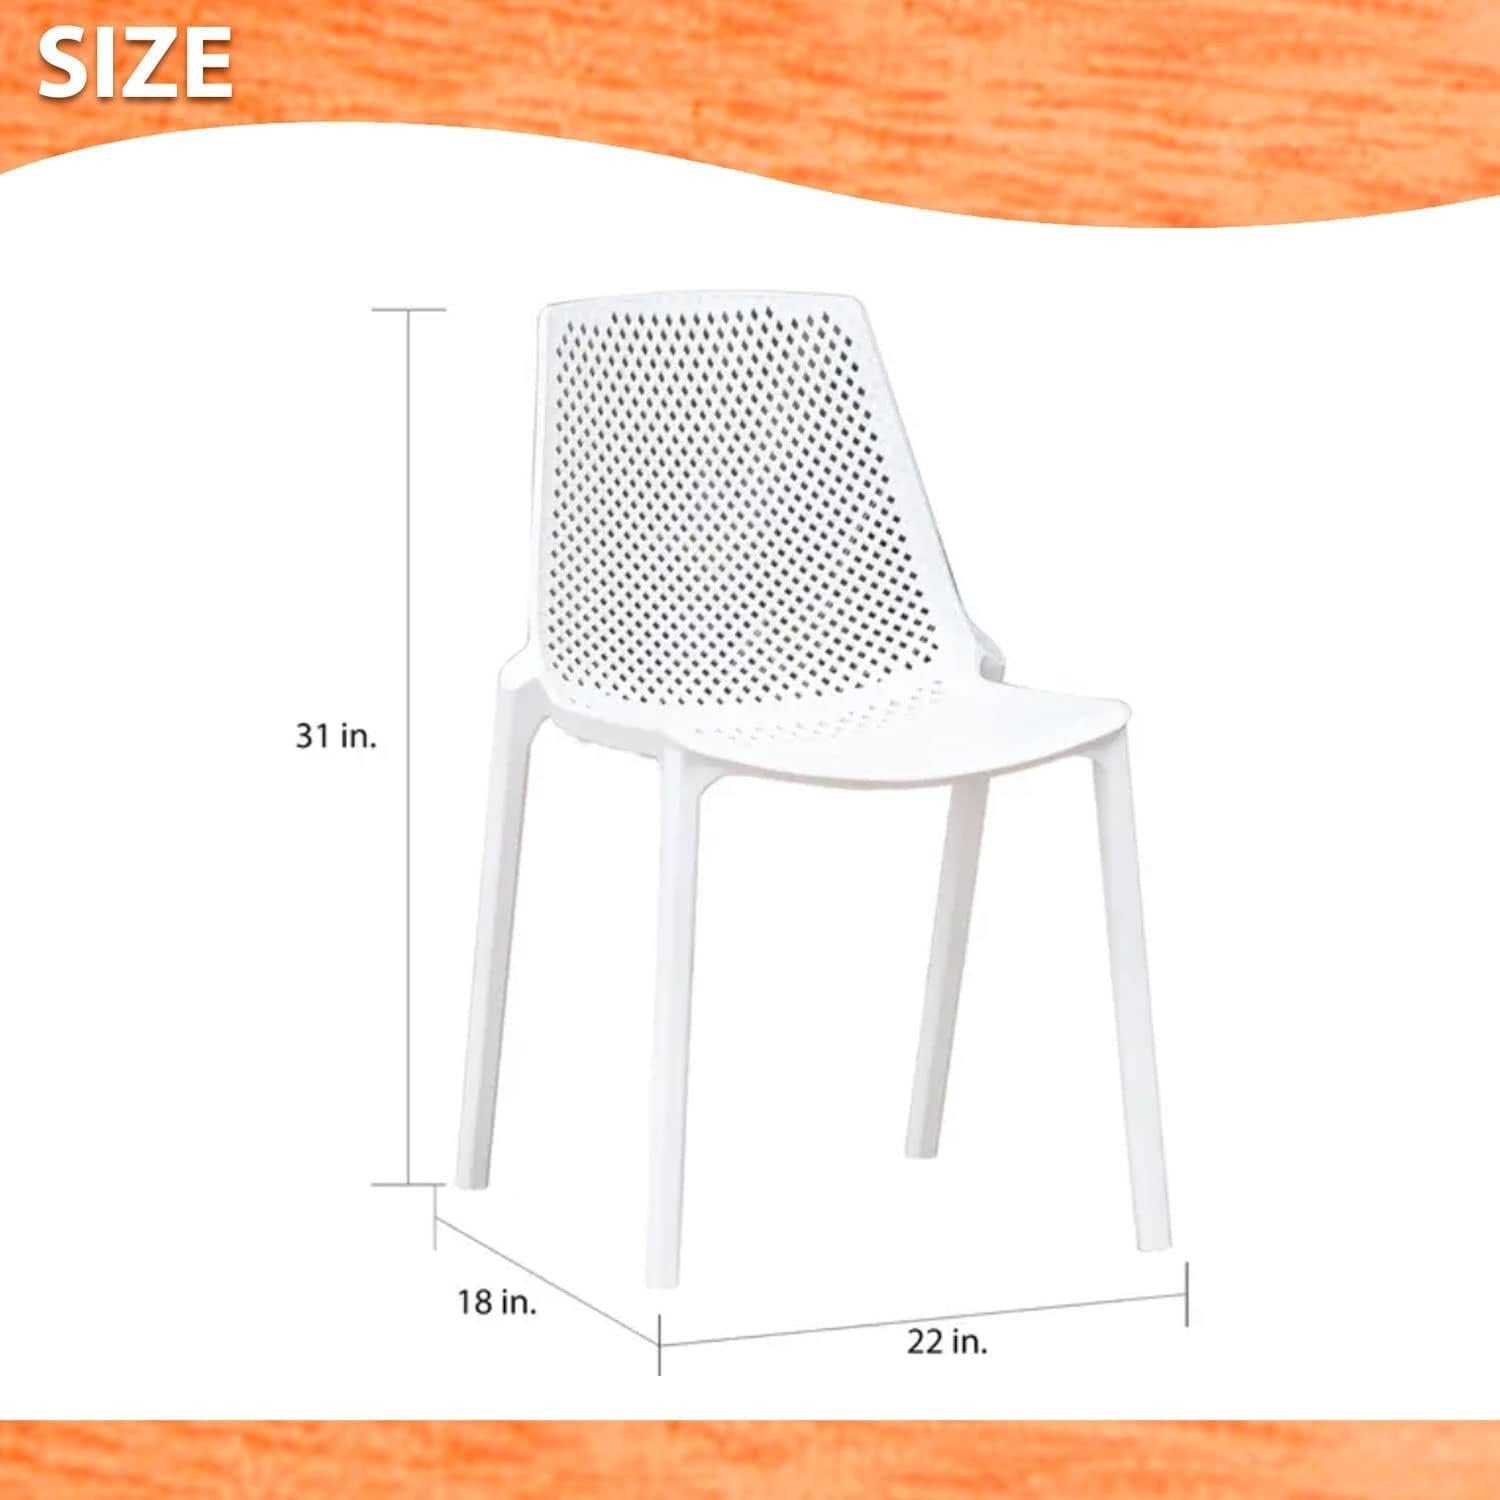 Amazonia Miami Patio Side Durable Outdoor and Indoor Resin Grey Chairs | Set of 4 - $195